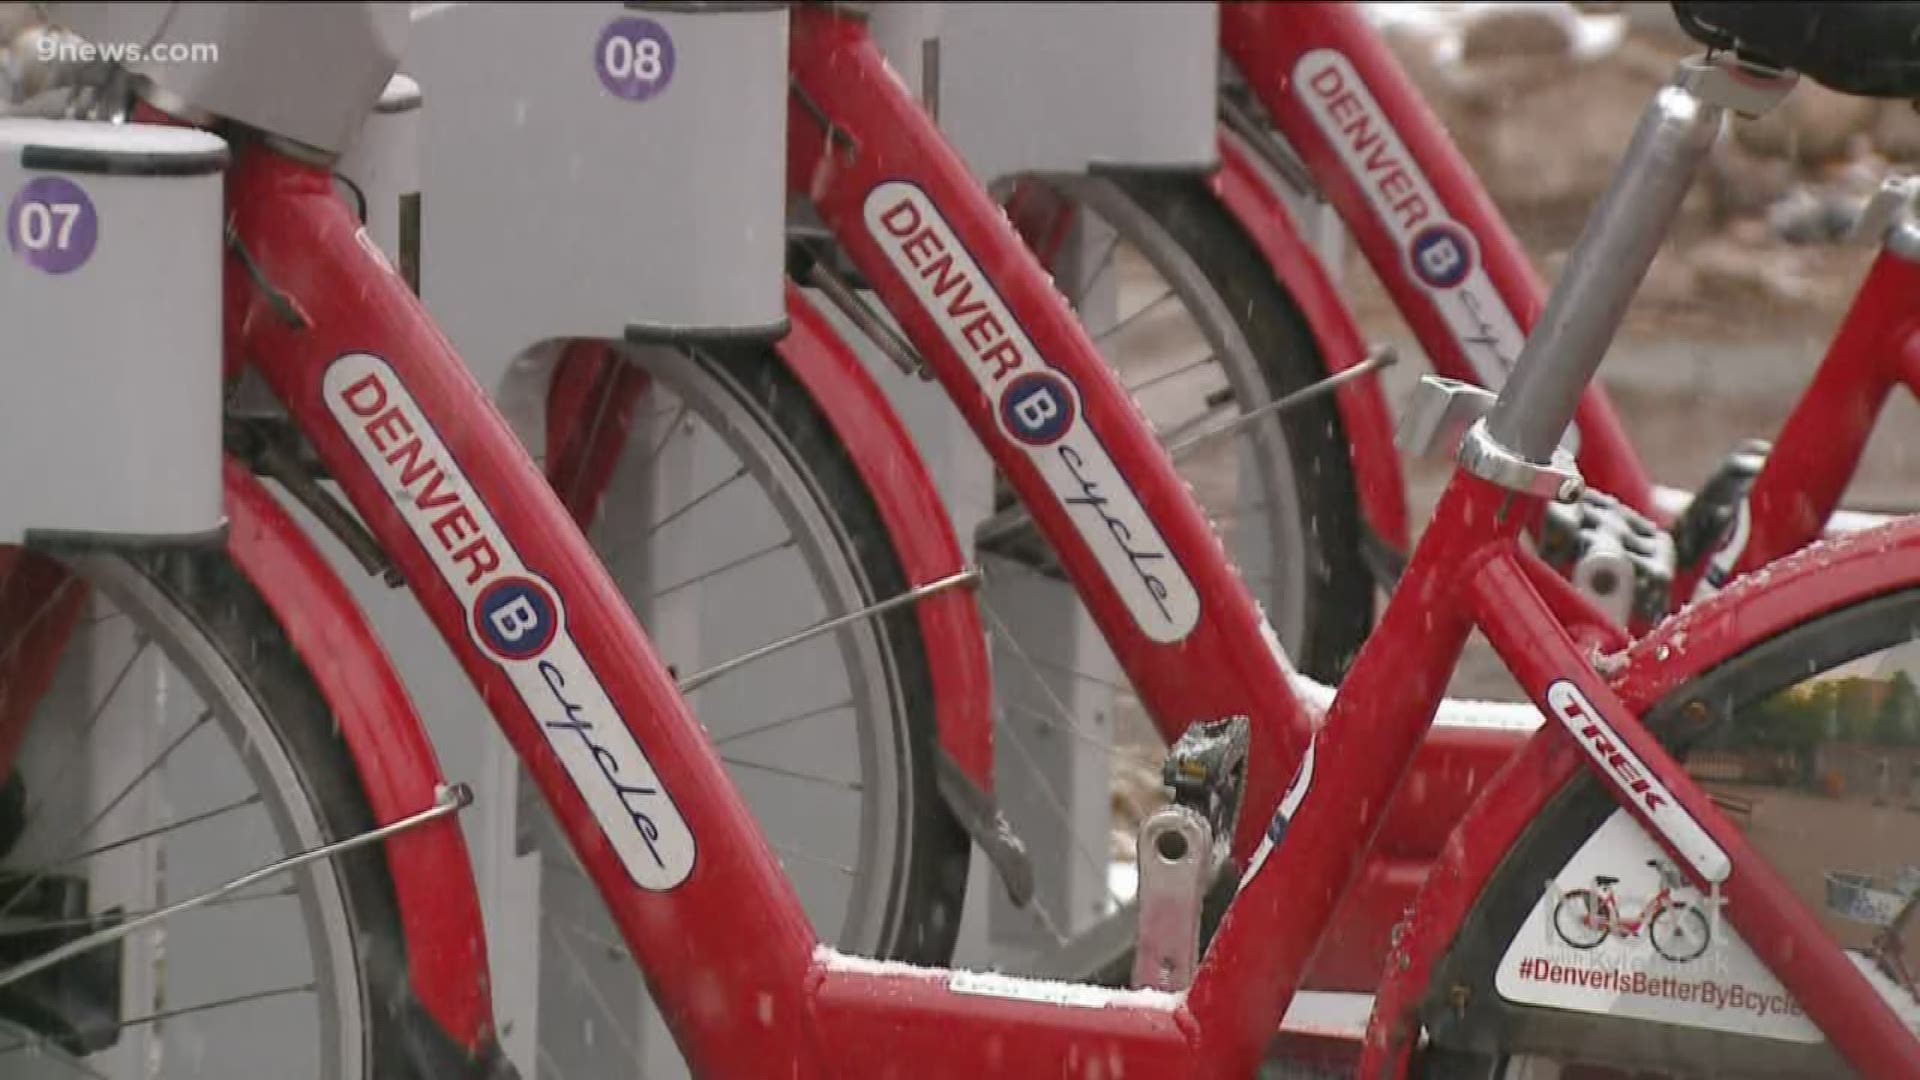 B-Cycle launched in Denver, but ridership is down with e-scooters and e-bikes and it's going away. But Denver hopes to replace it with a new vendor.